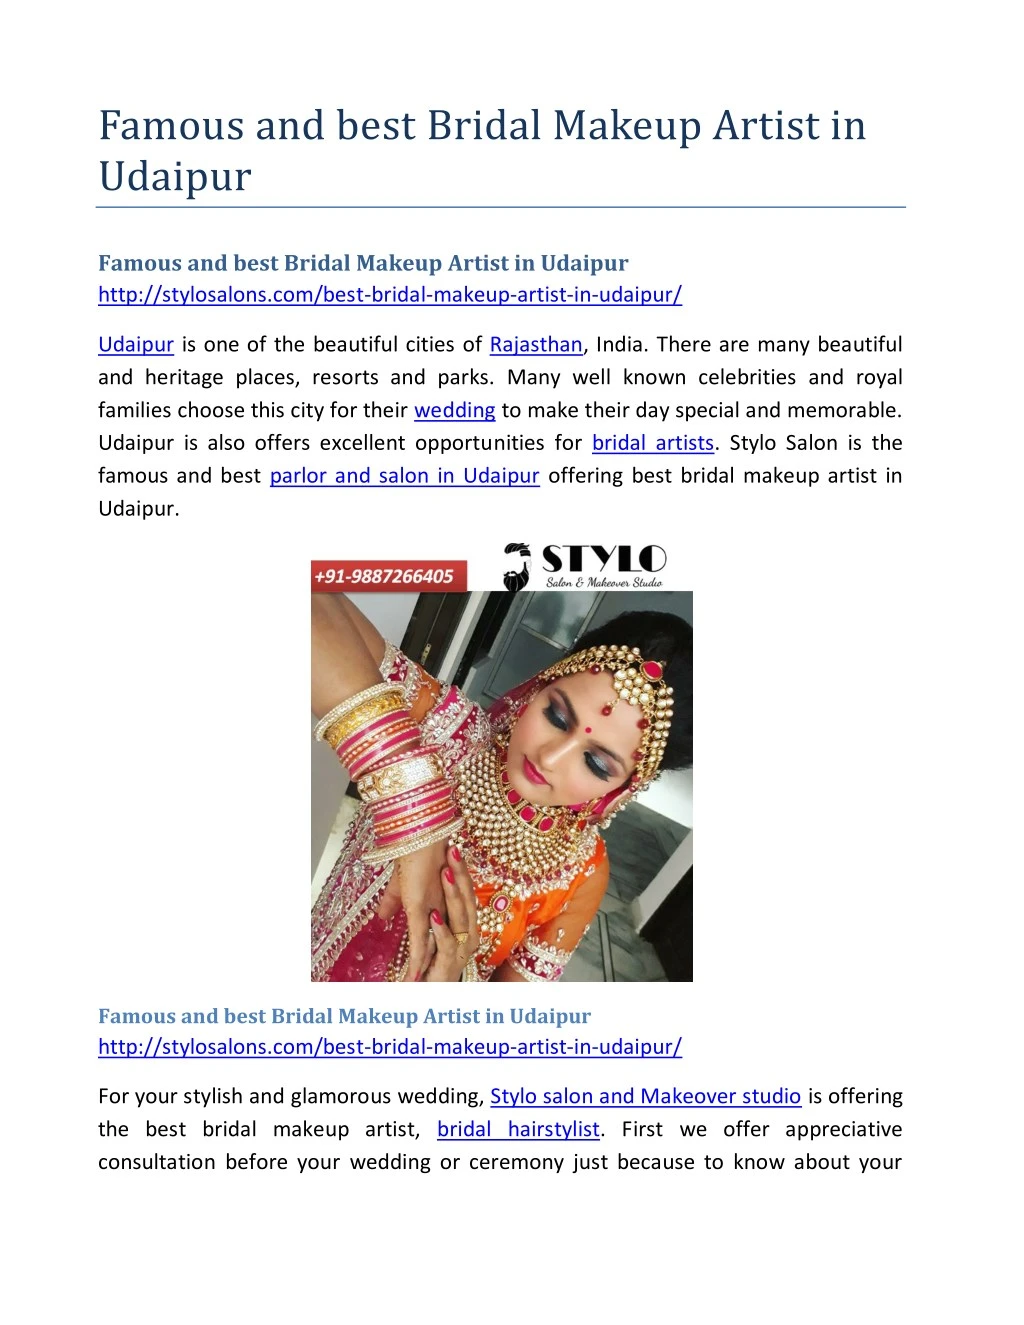 famous and best bridal makeup artist in udaipur